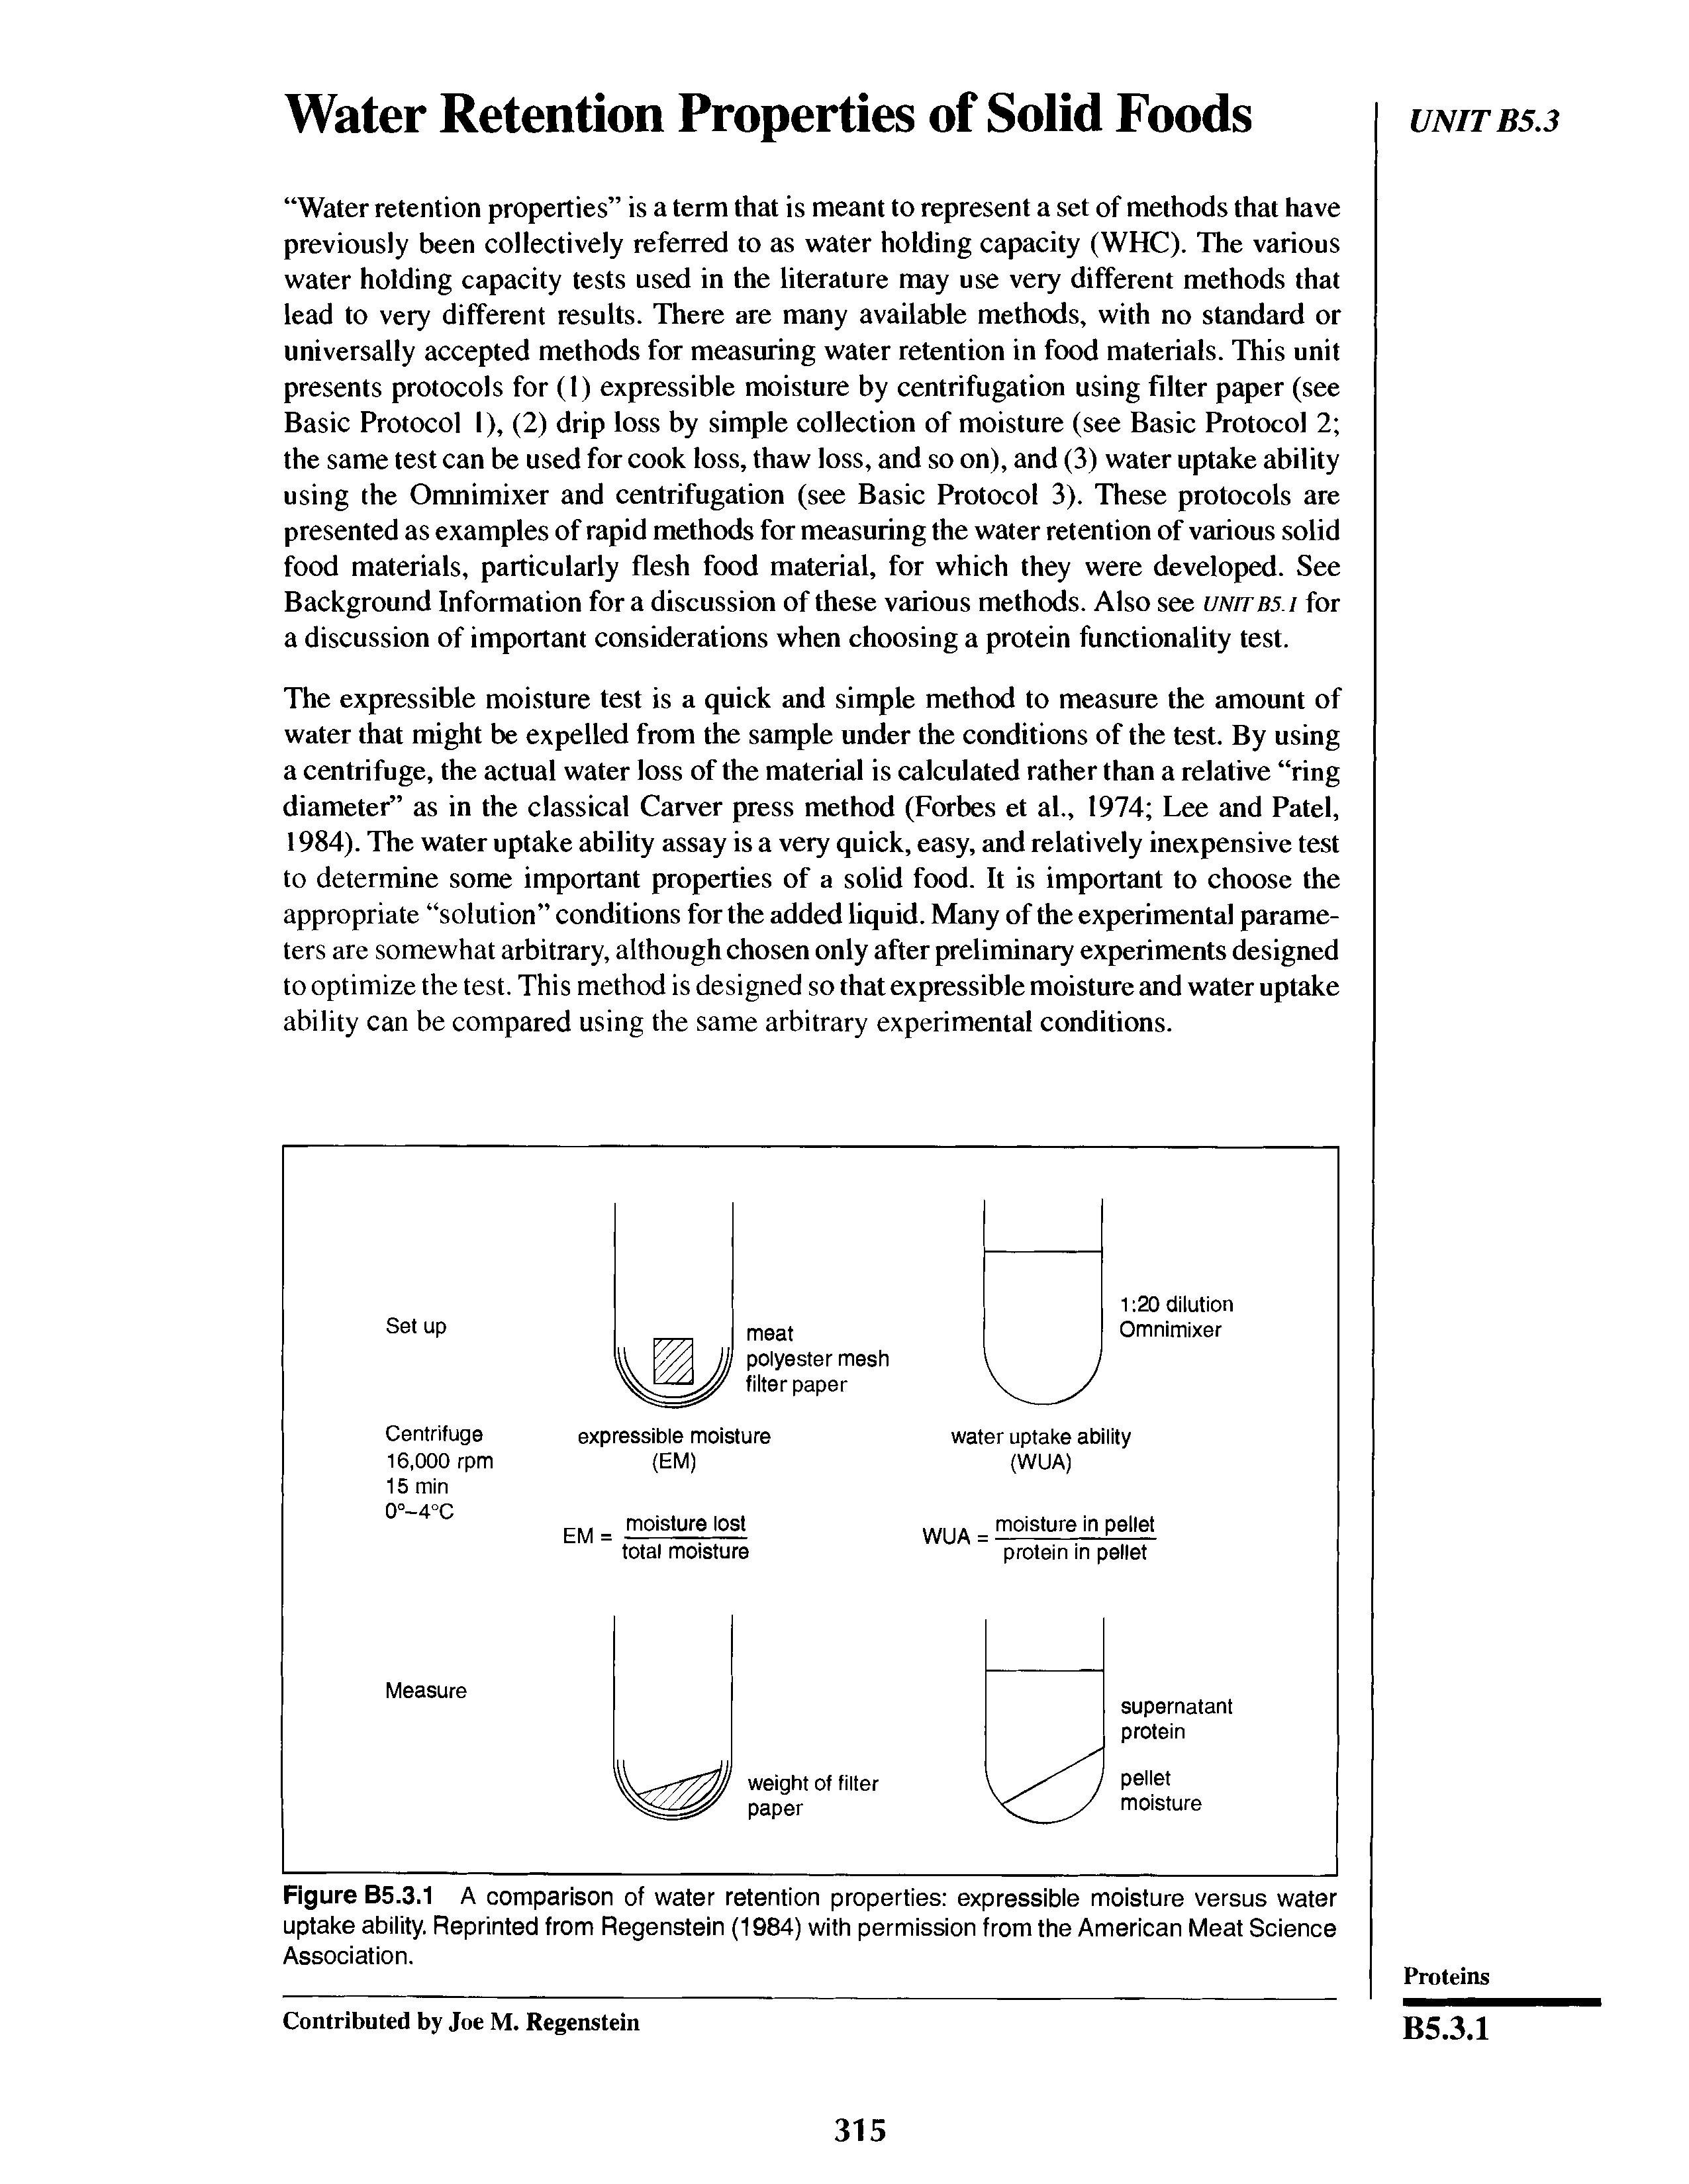 Figure B5.3.1 A comparison of water retention properties expressible moisture versus water uptake ability. Reprinted from Regenstein (1984) with permission from the American Meat Science Association.